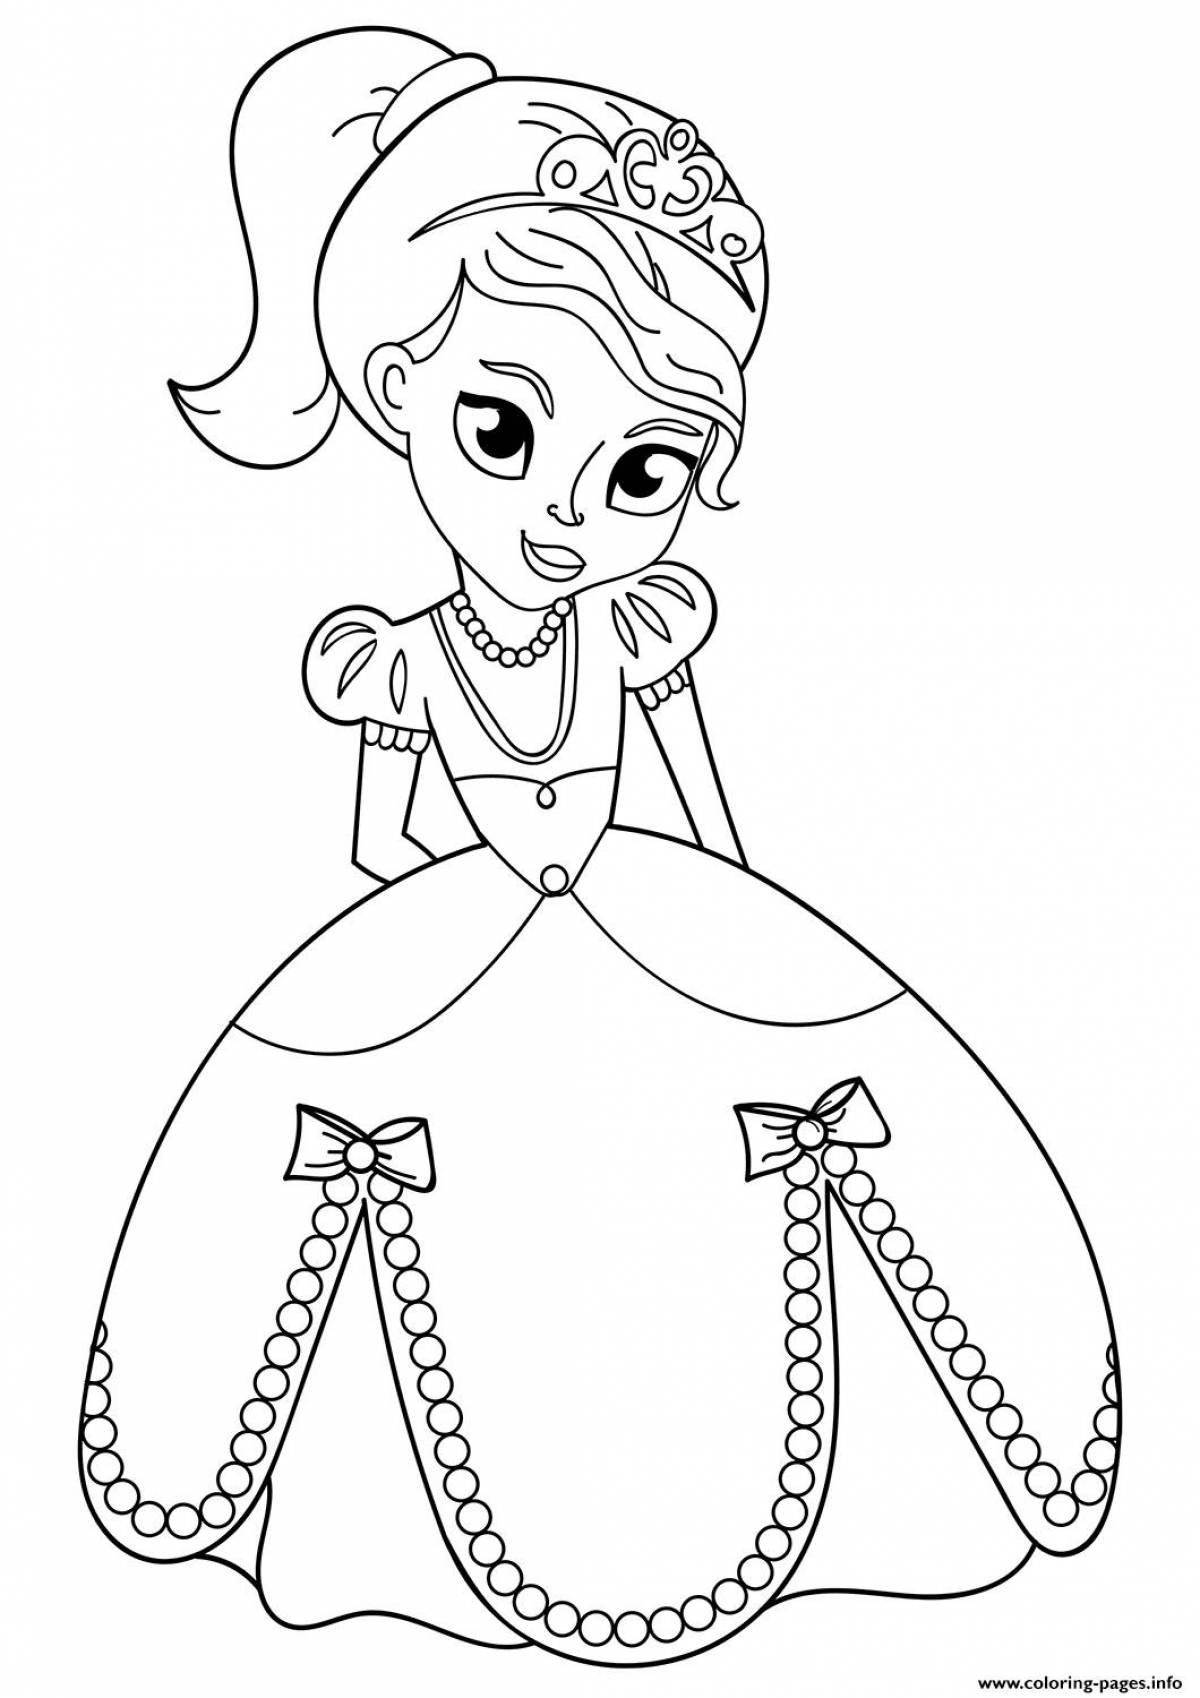 Amazing princess coloring book for kids 3-4 years old